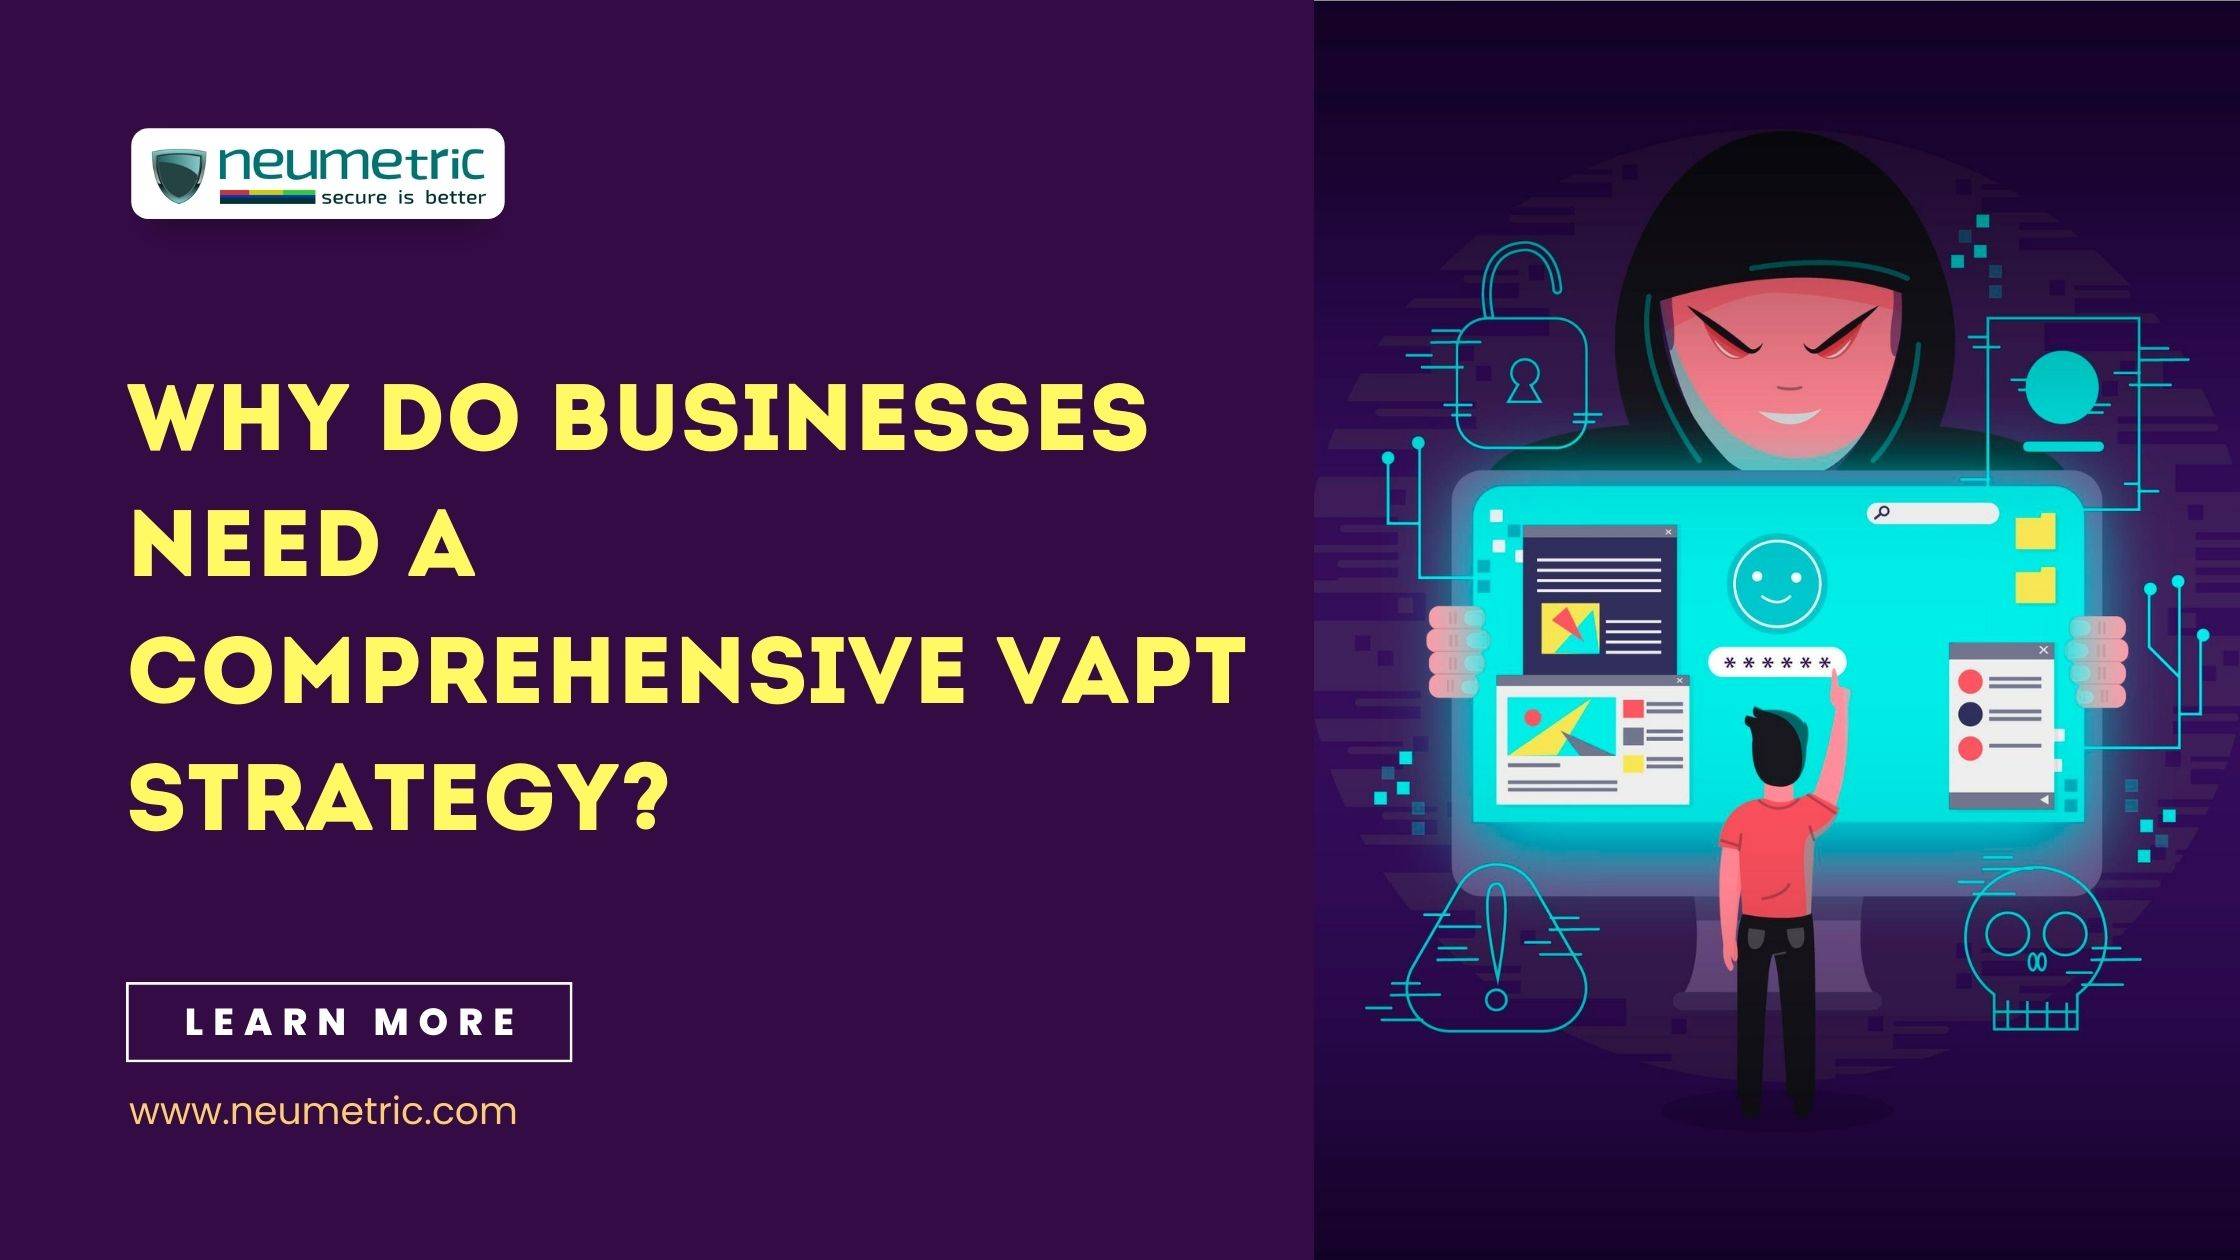 Why do businesses need a comprehensive VAPT strategy?